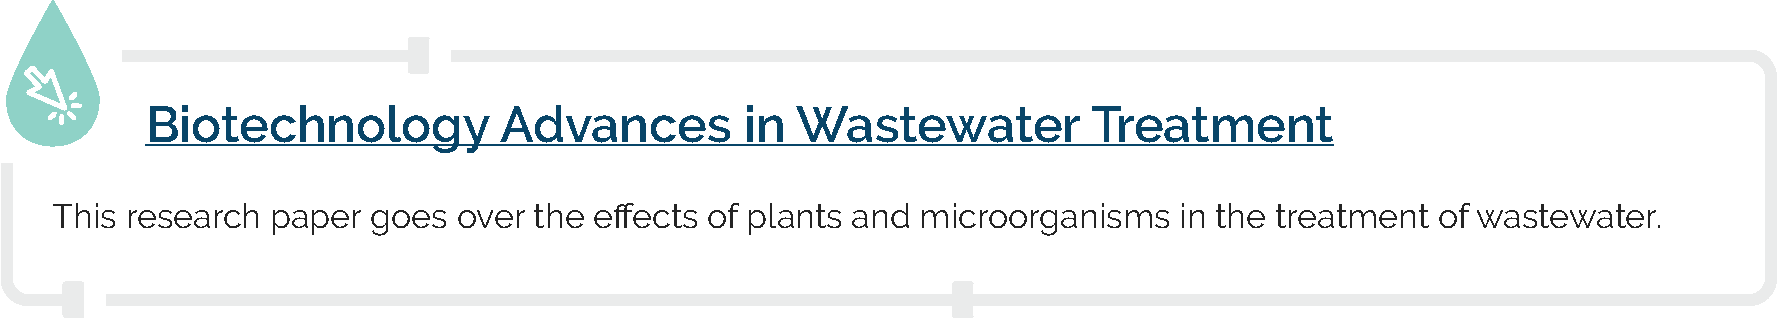 Biotechnology Advances in Wastewater Treatment